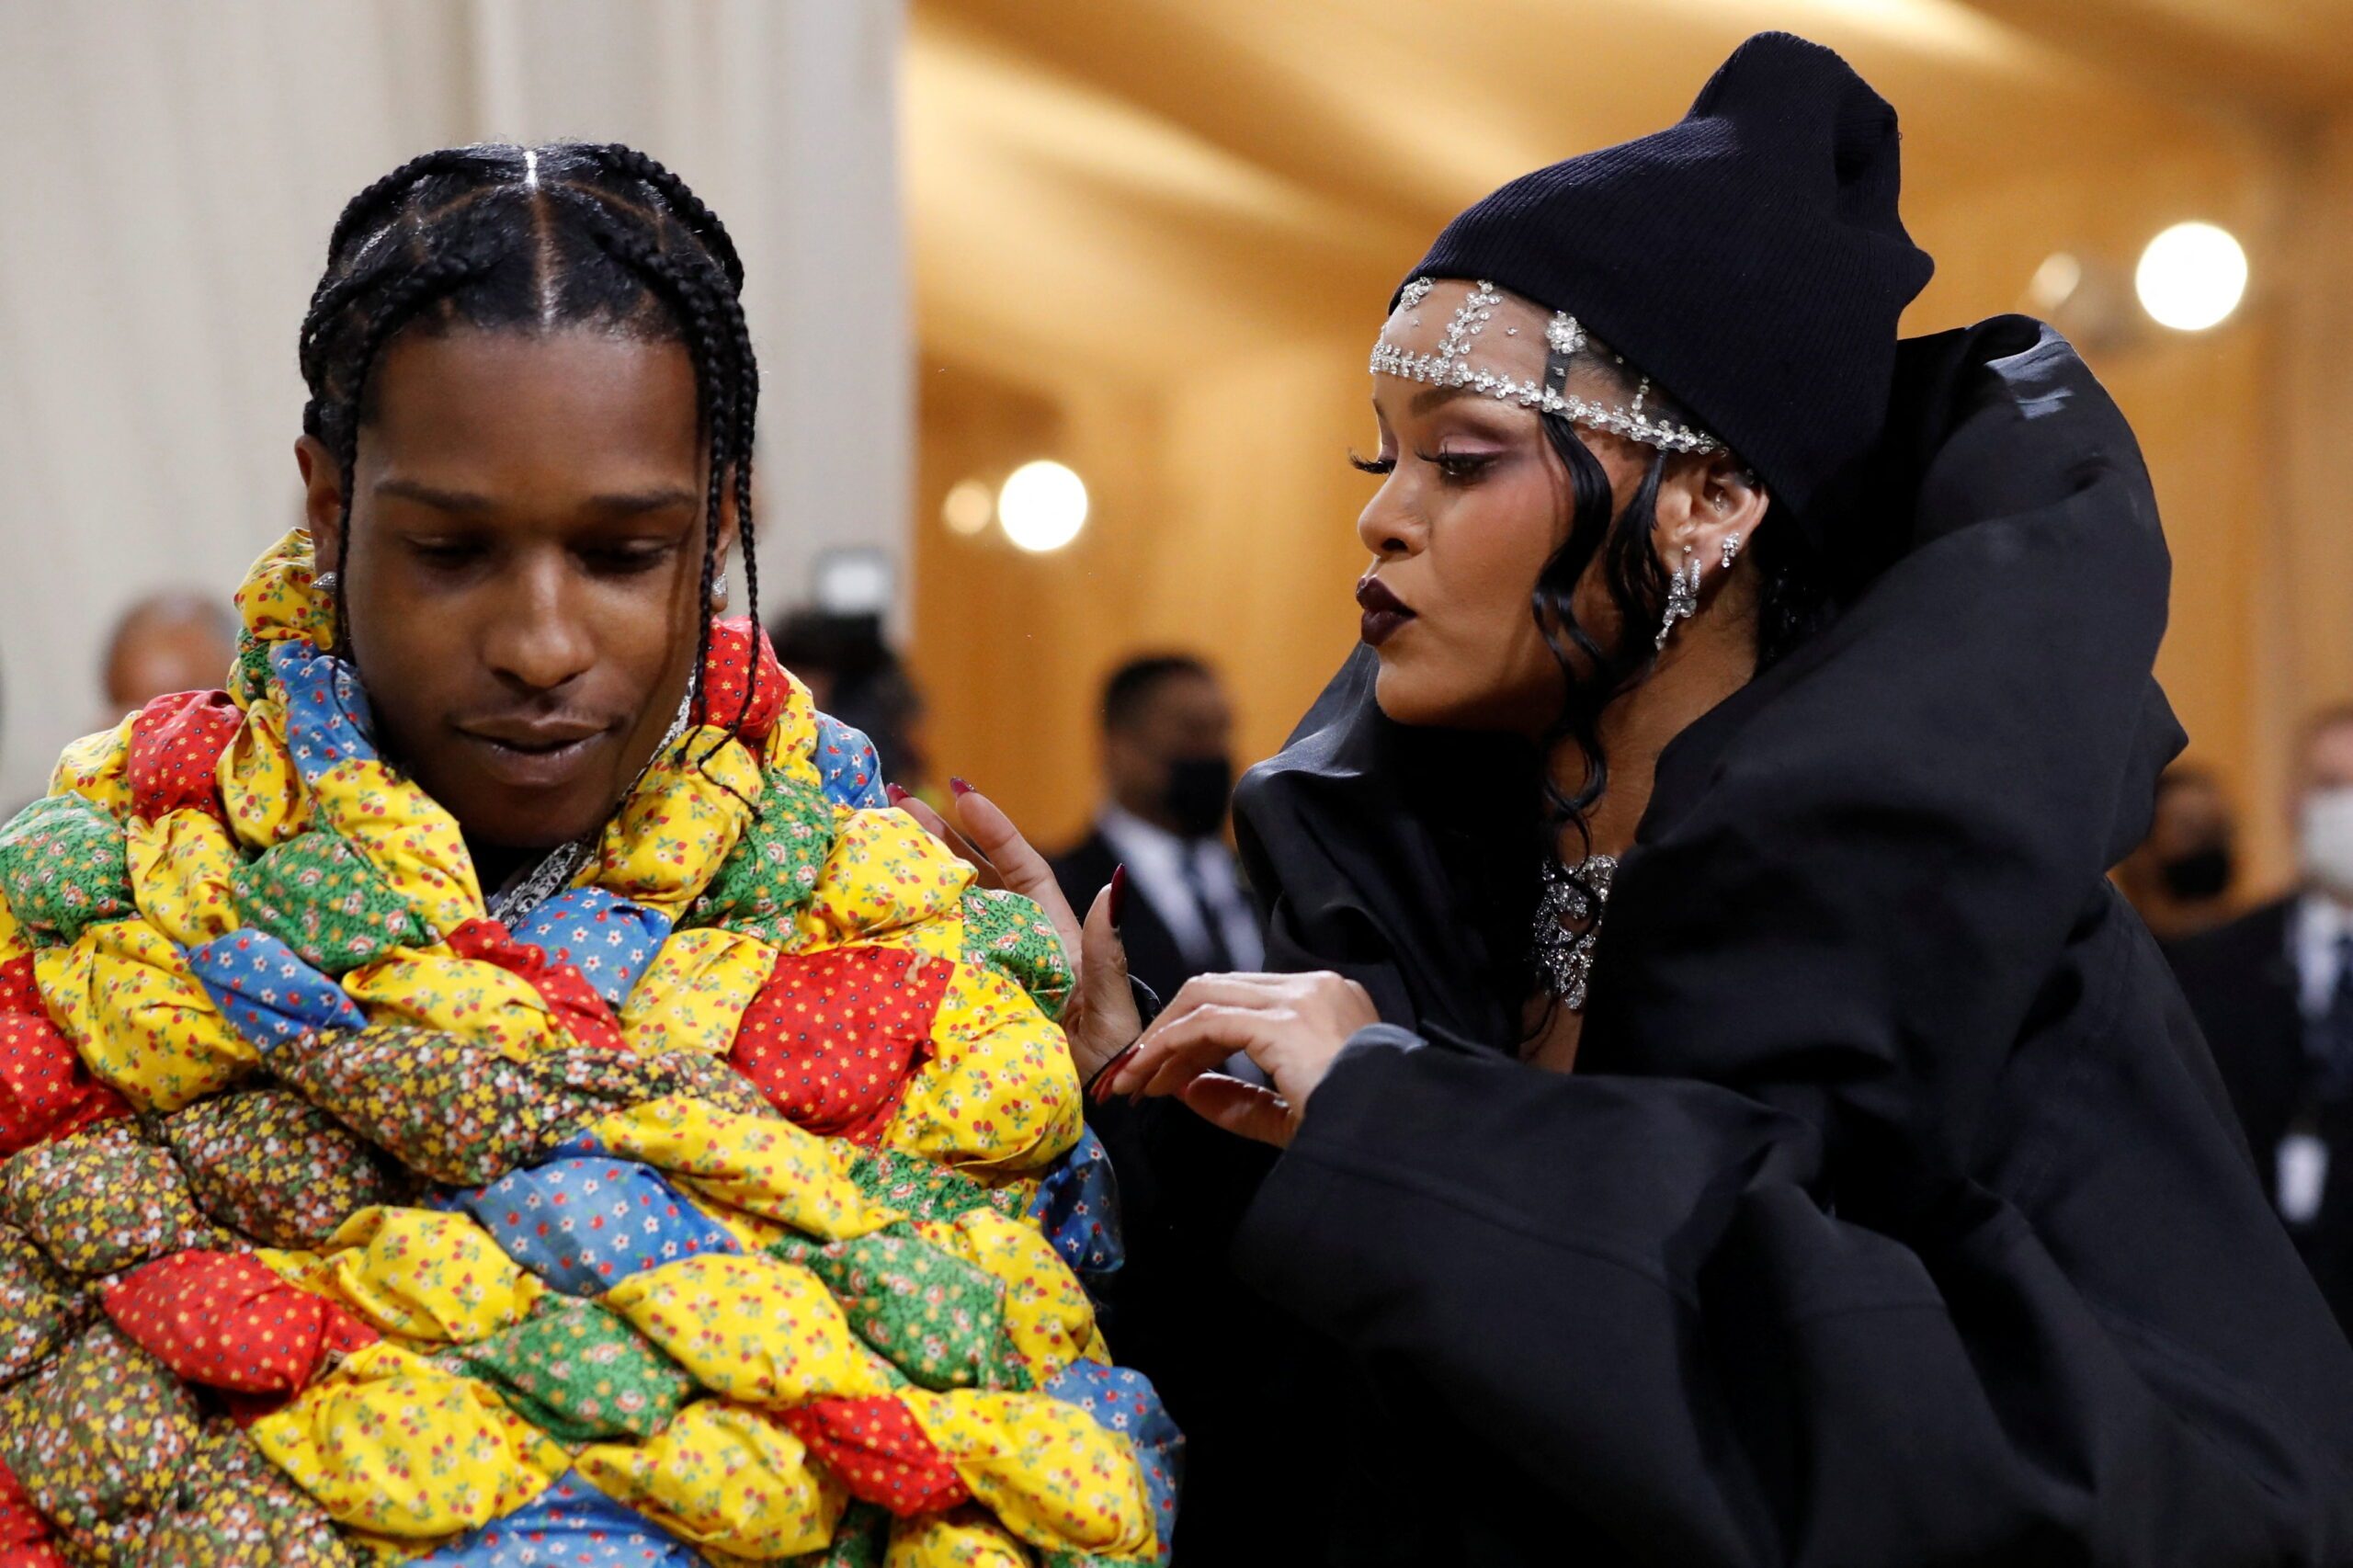 Singer Rihanna expecting first child with rapper A$AP Rocky